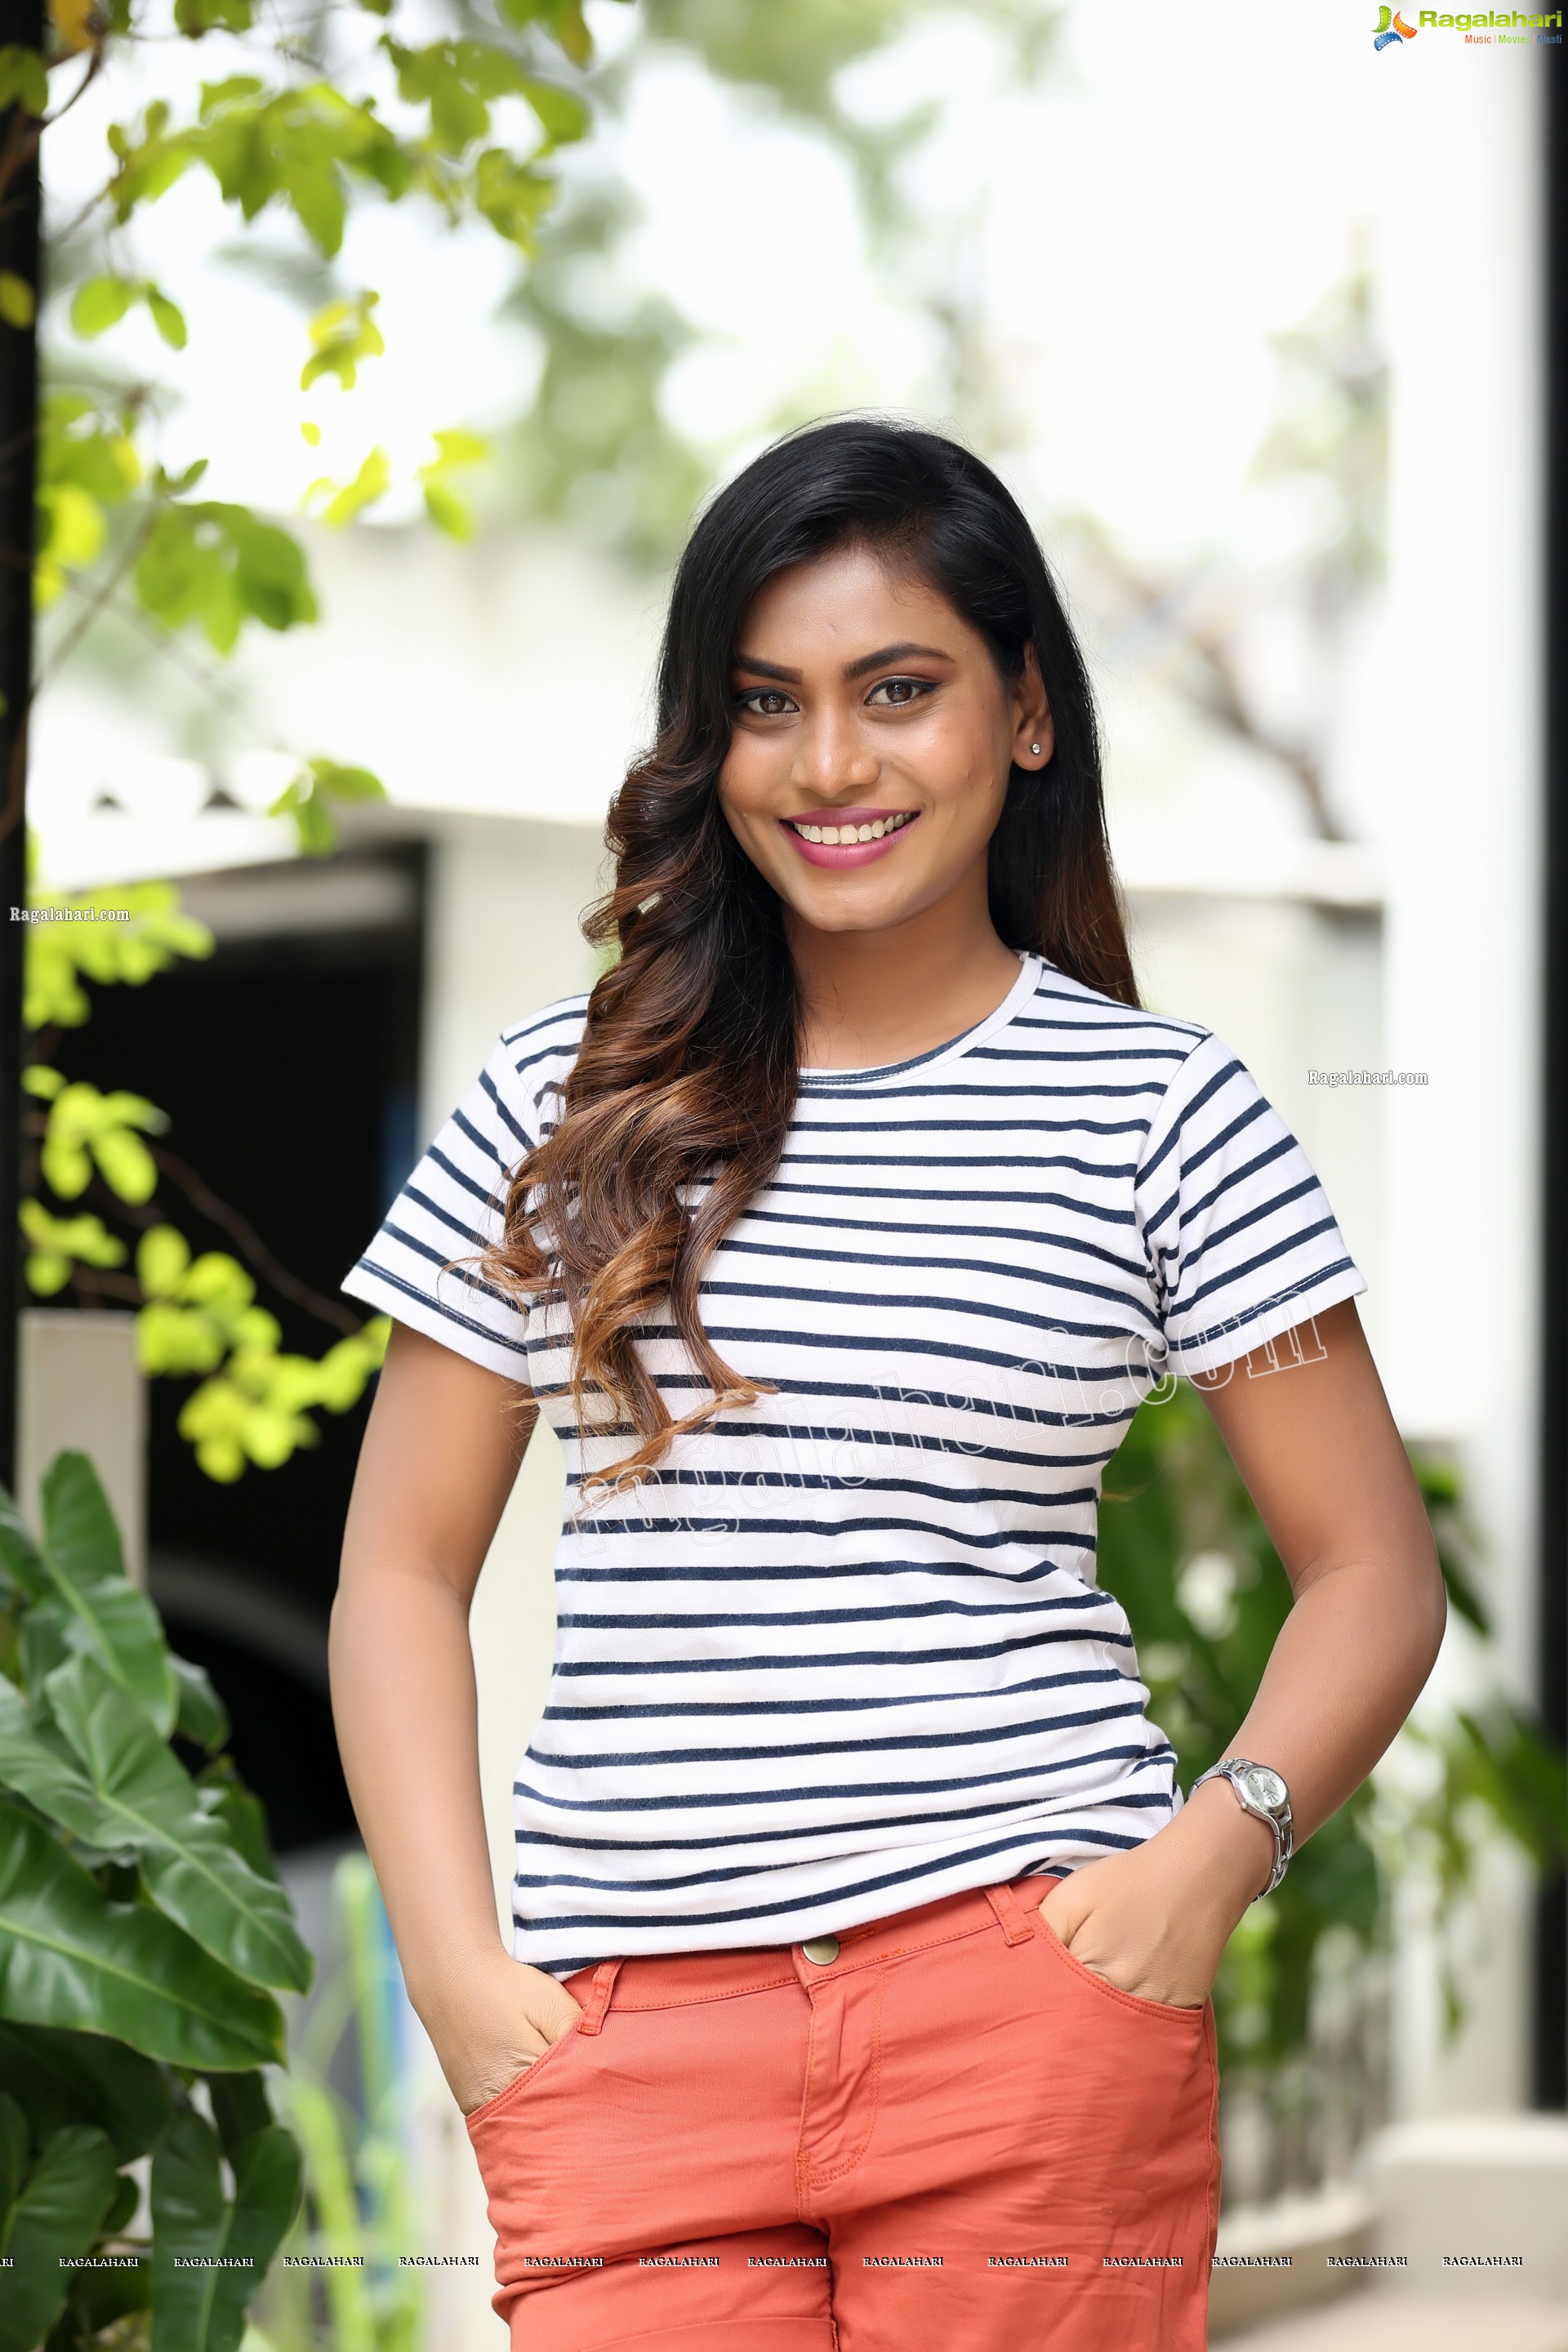 Priyanka Augustin in White Striped Top and Shorts, Exclusive Photo Shoot